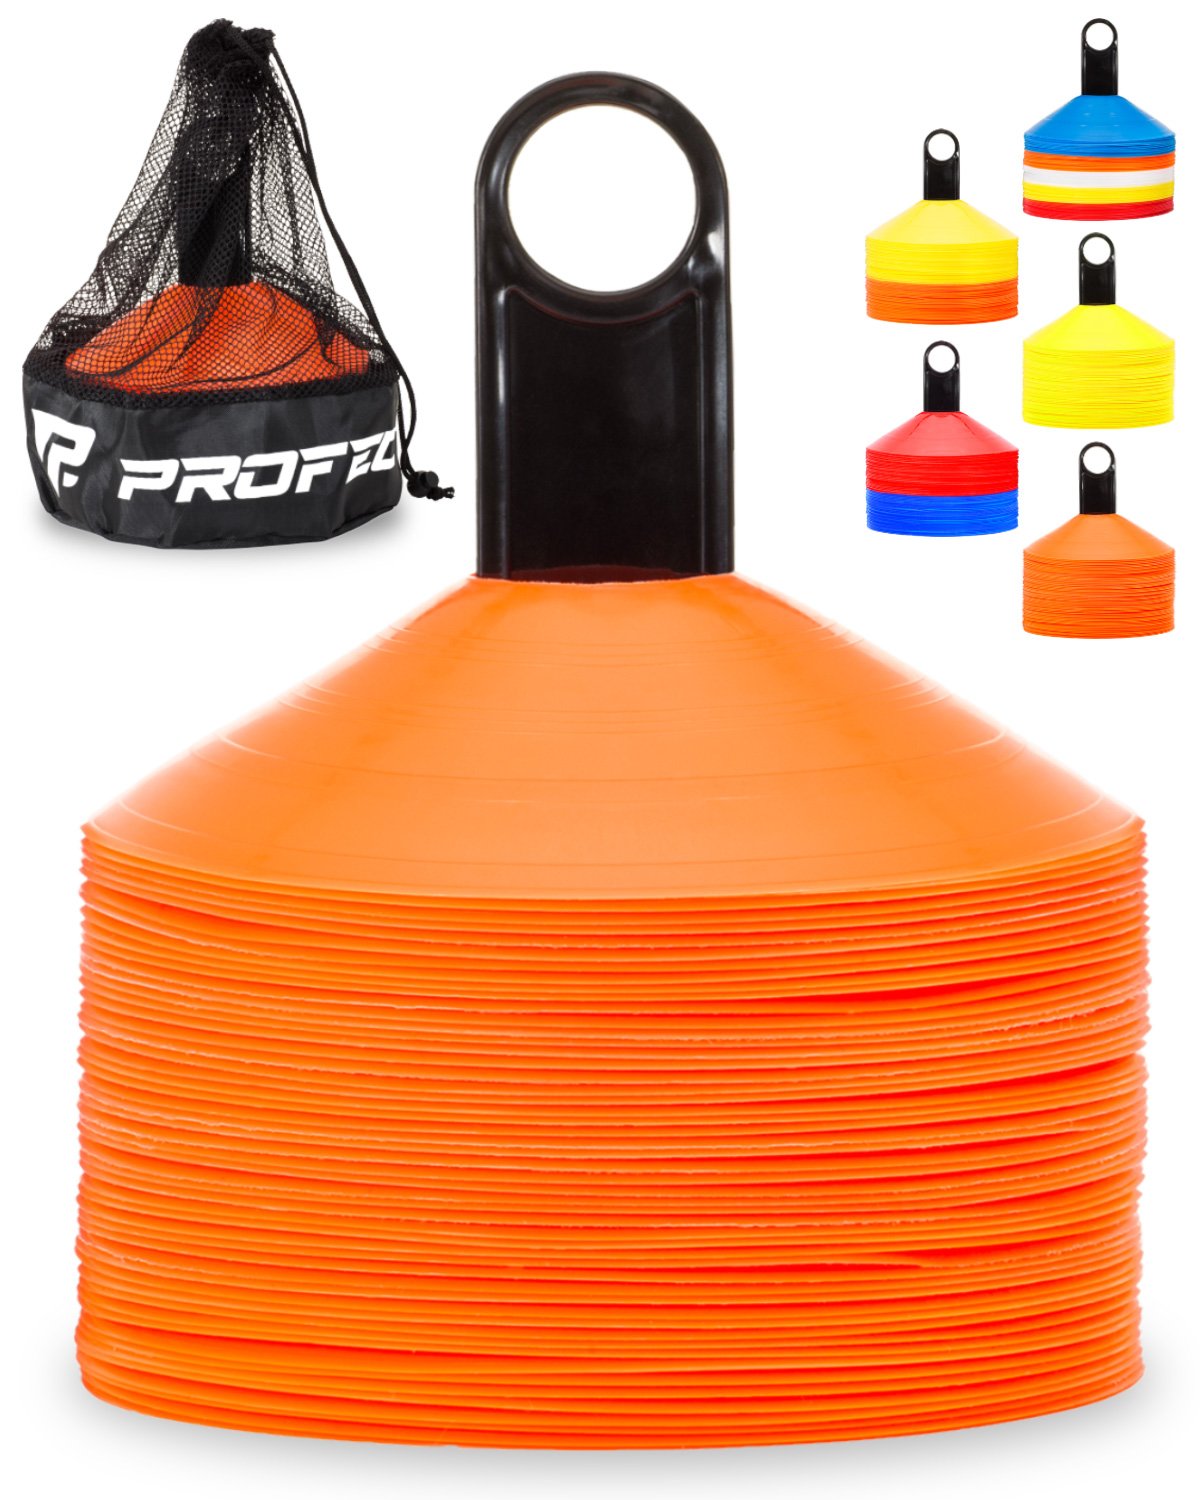 Pro Disc  Agility Training Cones Set of 50 With Carry Bag And Holder  Orange) - Opticdeals